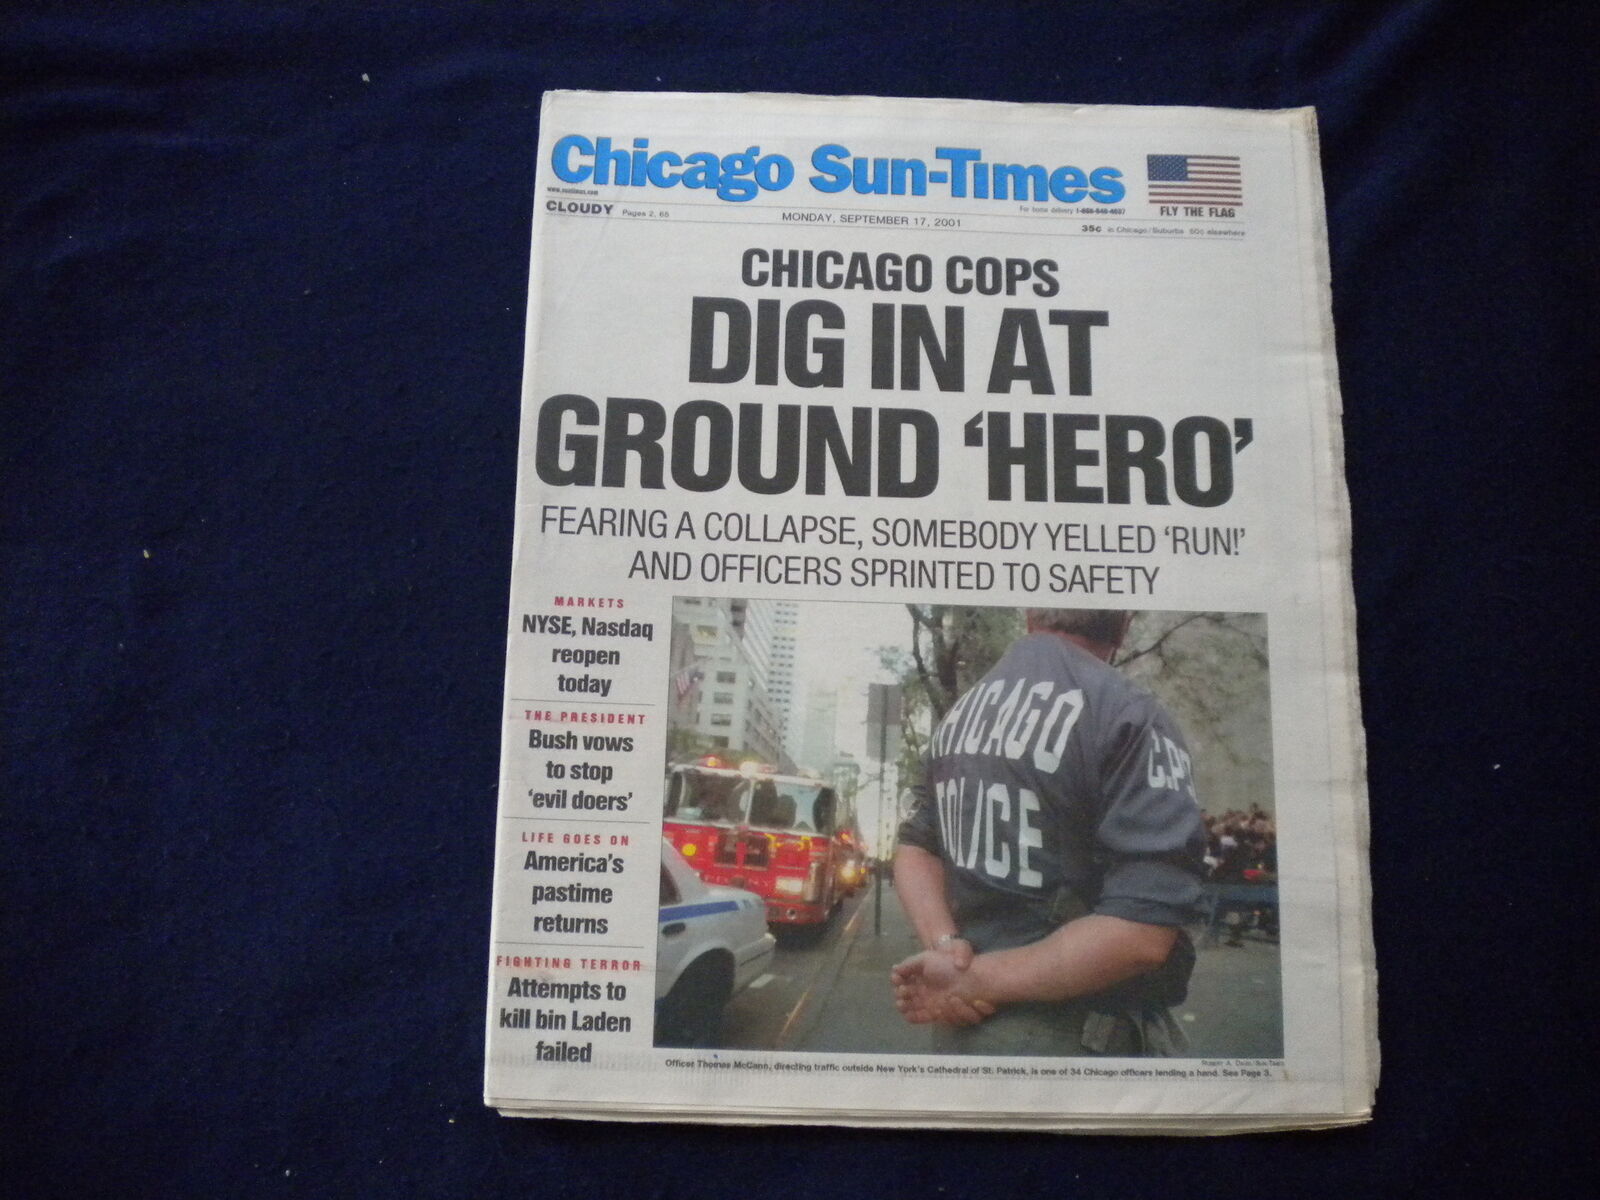 2001 SEPTEMBER 17 CHICAGO SUN-TIMES NEWSPAPER - DIG IN AT GROUND 'HERO'- NP 5945